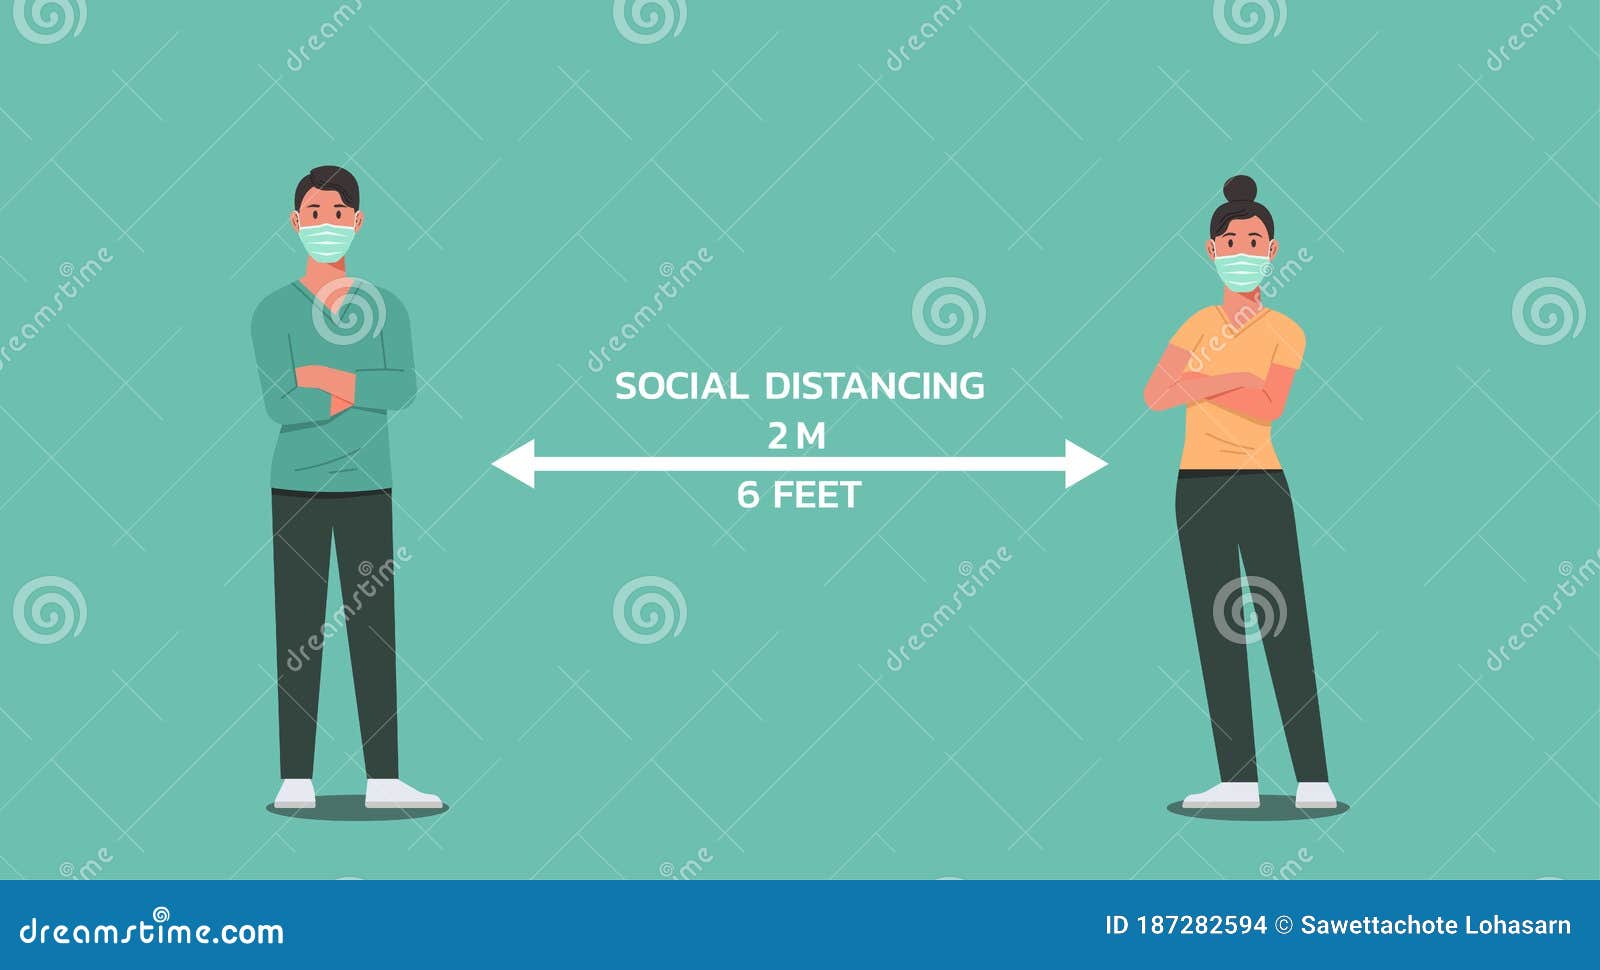 man and woman wear face mask and cross their arms standing together maintain social distancing